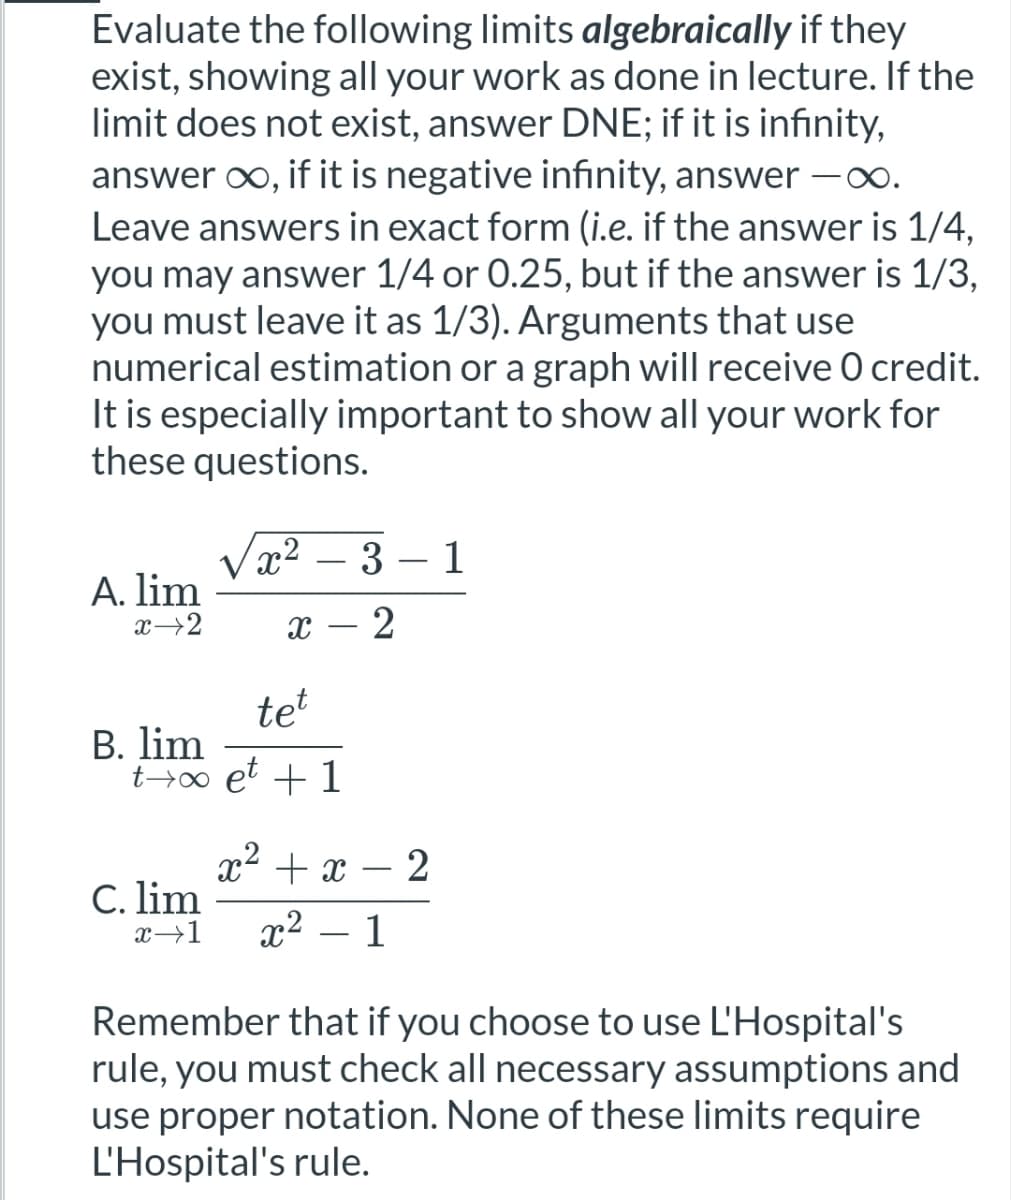 Evaluate the following limits algebraically if they
exist, showing all your work as done in lecture. If the
limit does not exist, answer DNE; if it is infinity,
answer ∞, if it is negative infinity, answer -∞.
Leave answers in exact form (i.e. if the answer is 1/4,
you may answer 1/4 or 0.25, but if the answer is 1/3,
you must leave it as 1/3). Arguments that use
numerical estimation or a graph will receive 0 credit.
It is especially important to show all your work for
these questions.
x2
3
1
A. lim
x 2
X
tet
B. lim
to et + 1
x² + x - 2
C. lim
x-1
x² - 1
Remember that if you choose to use L'Hospital's
rule, you must check all necessary assumptions and
use proper notation. None of these limits require
L'Hospital's rule.
-
2